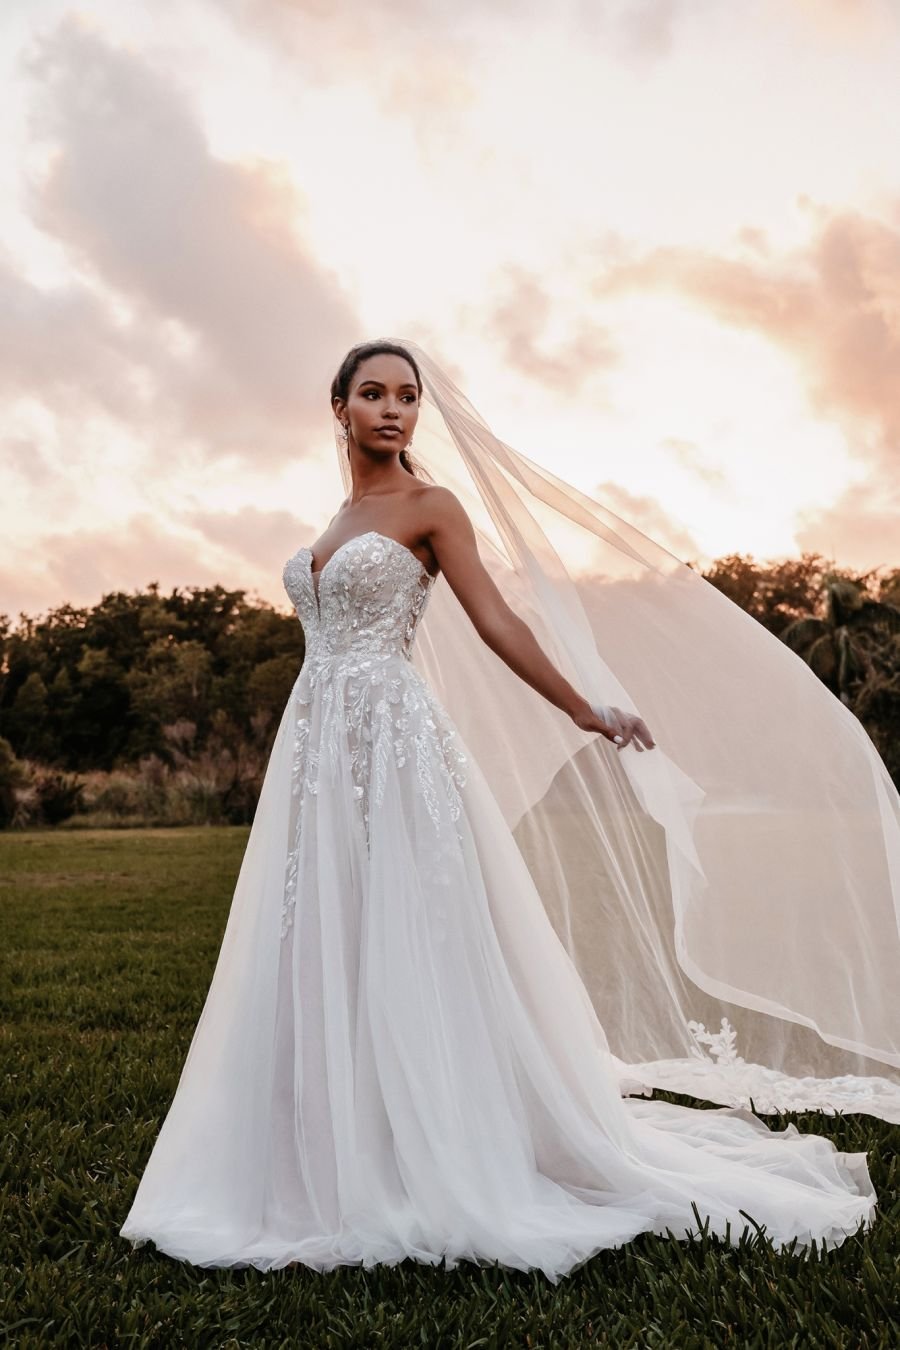 Wedding Dresses with Sleeves | Essense of Australia Bridal Gowns